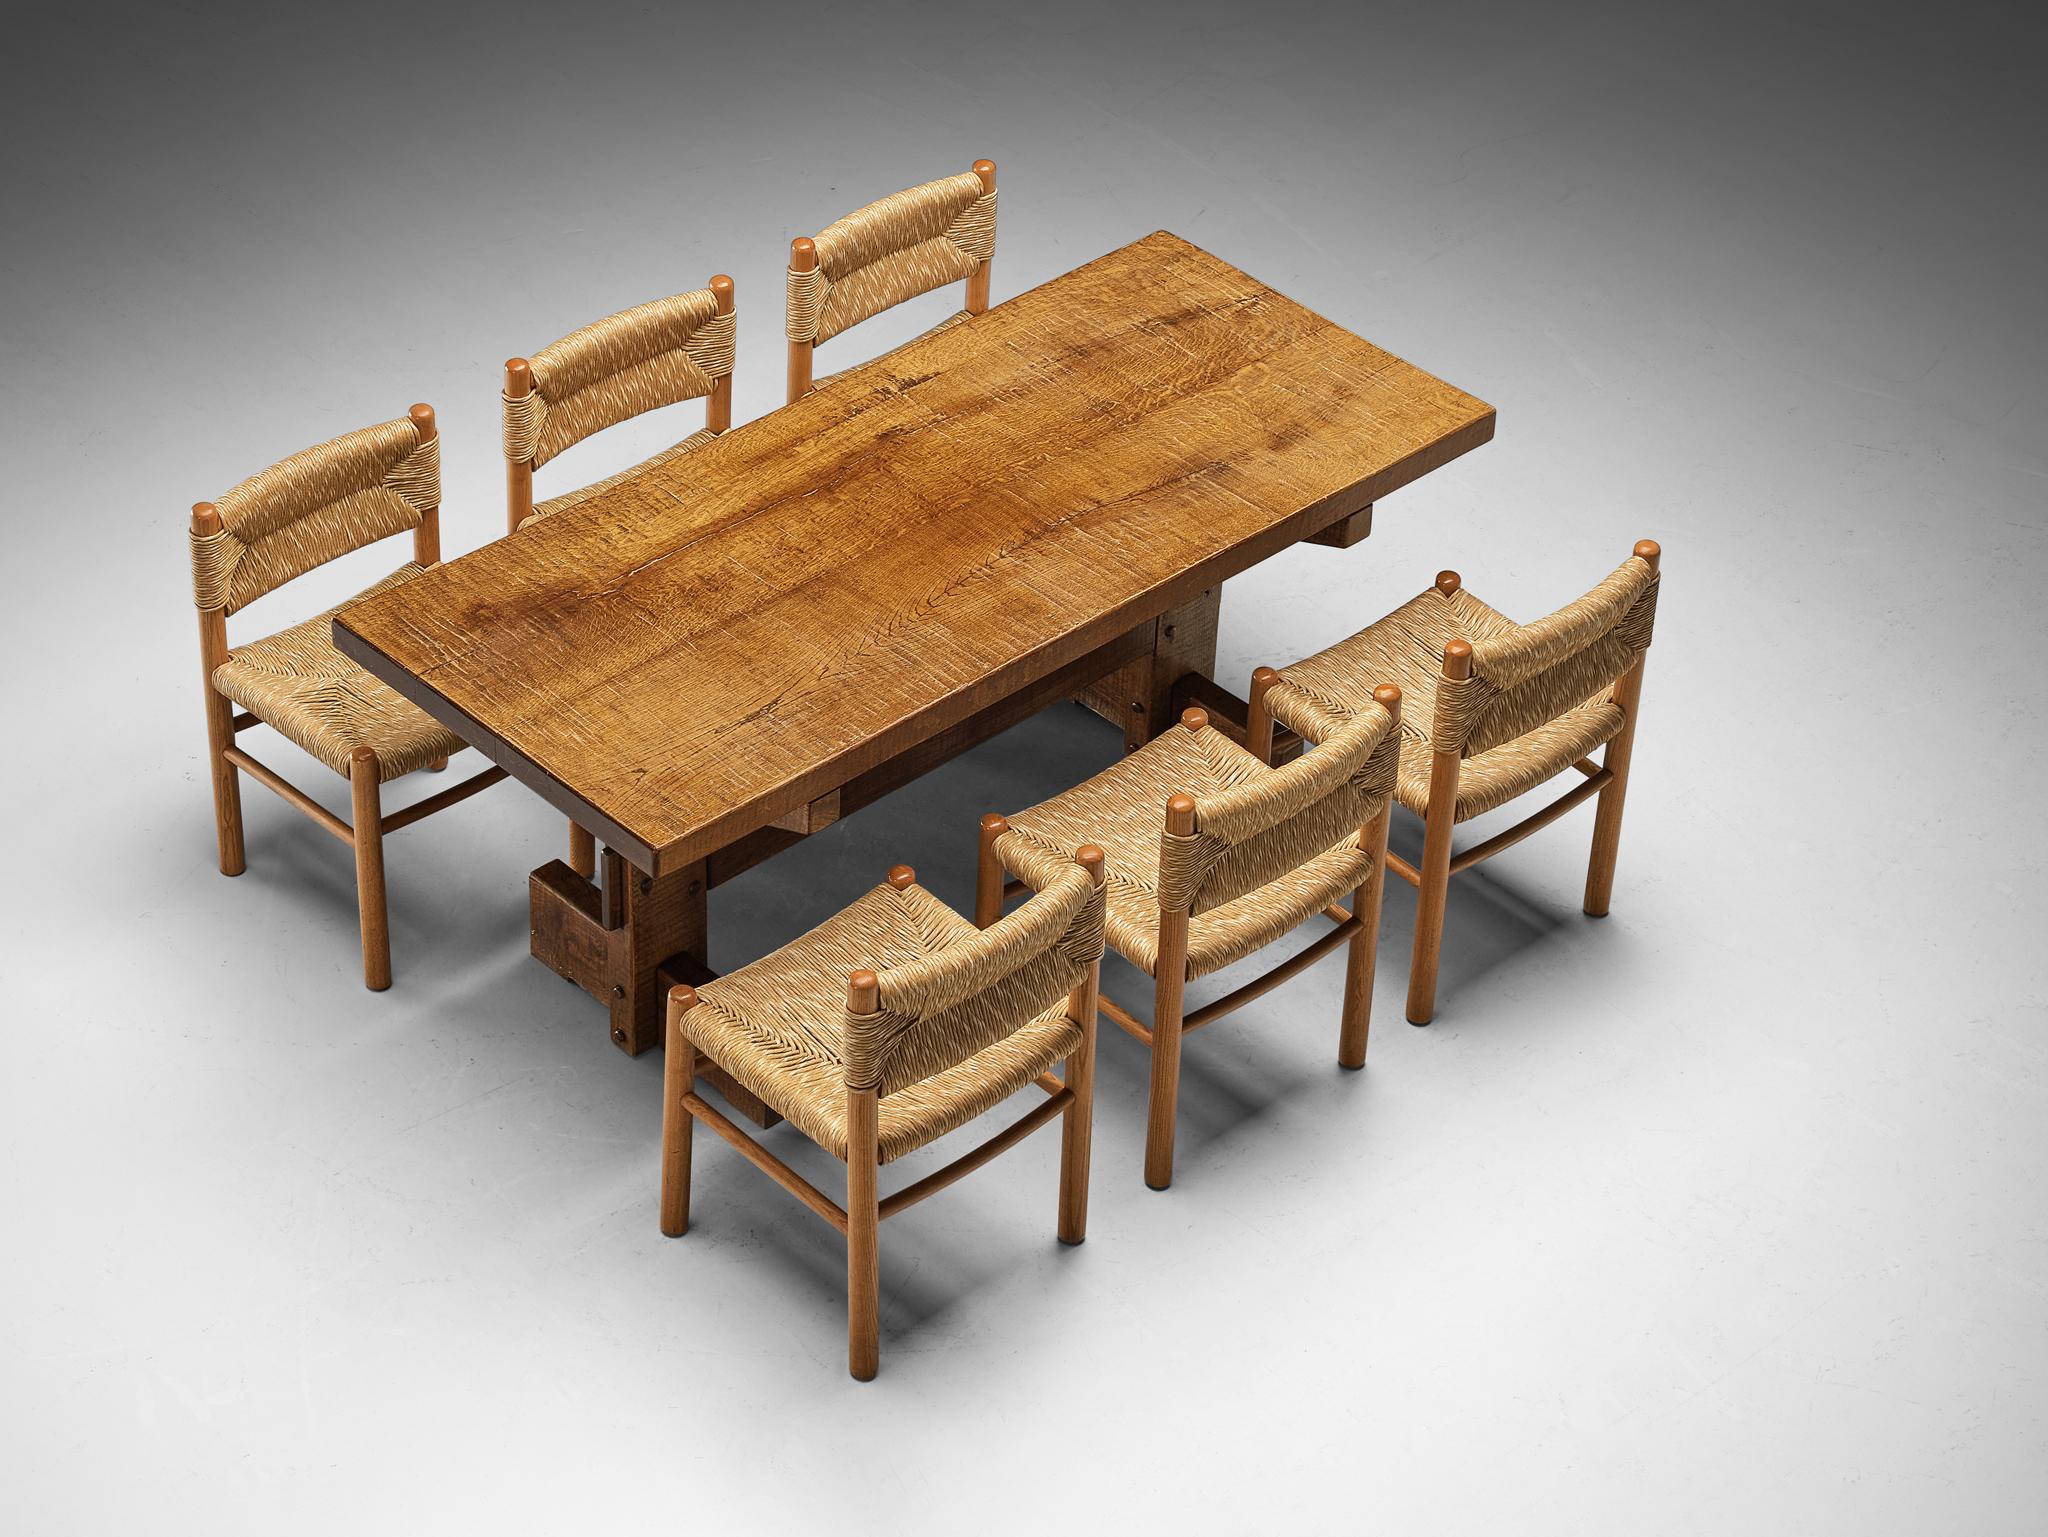 Dining room set consisting of Giuseppe Rivadossi for Officina Rivadossi dining table with set of six French dining chairs 

Giuseppe Rivadossi for Officina Rivadossi, dining table, oak, Italy, 1970s.

Giuseppe Rivadossi once again proves his great